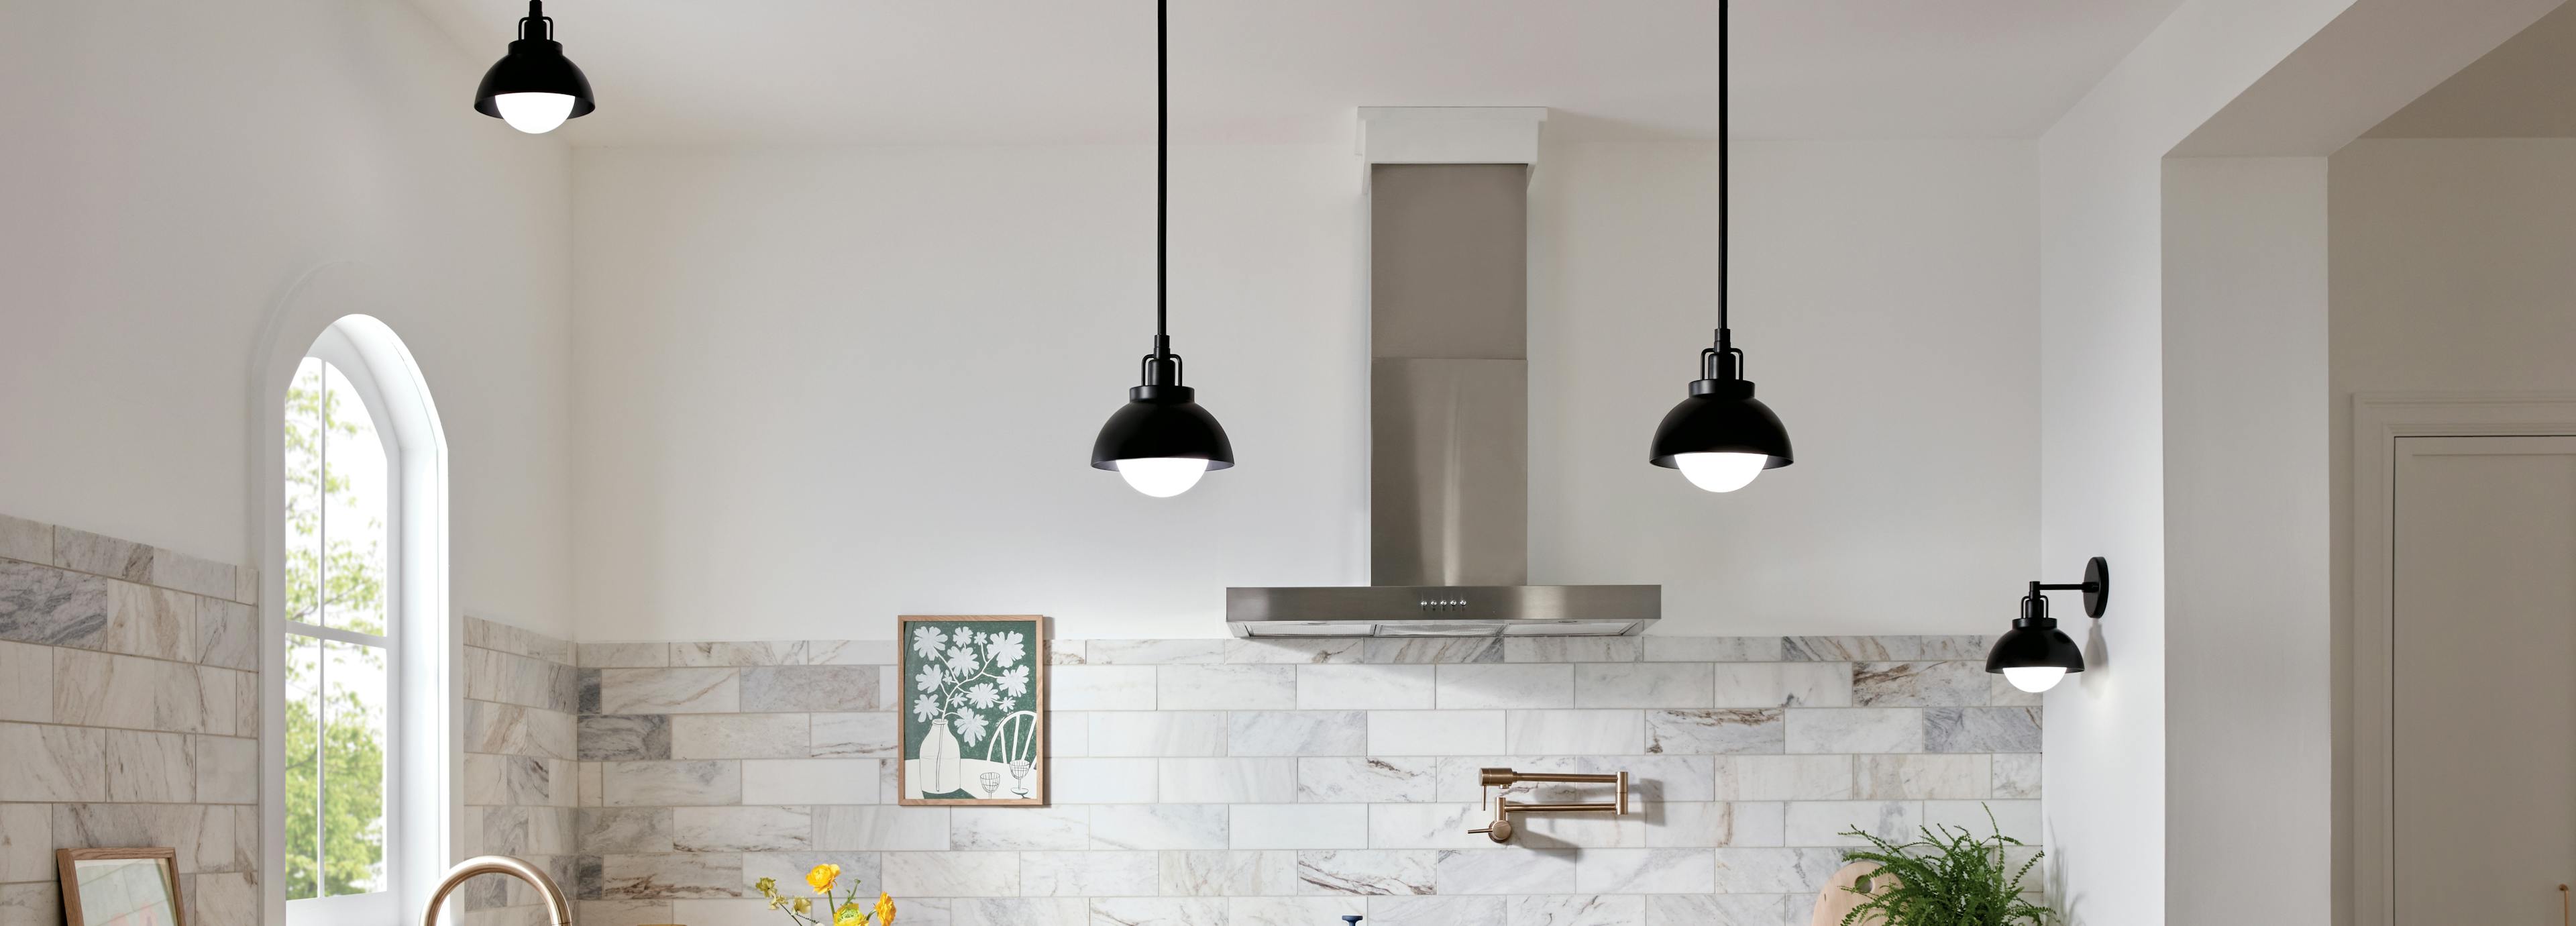 White kitchen during the day with marble wall tiling and black niva pendant lights